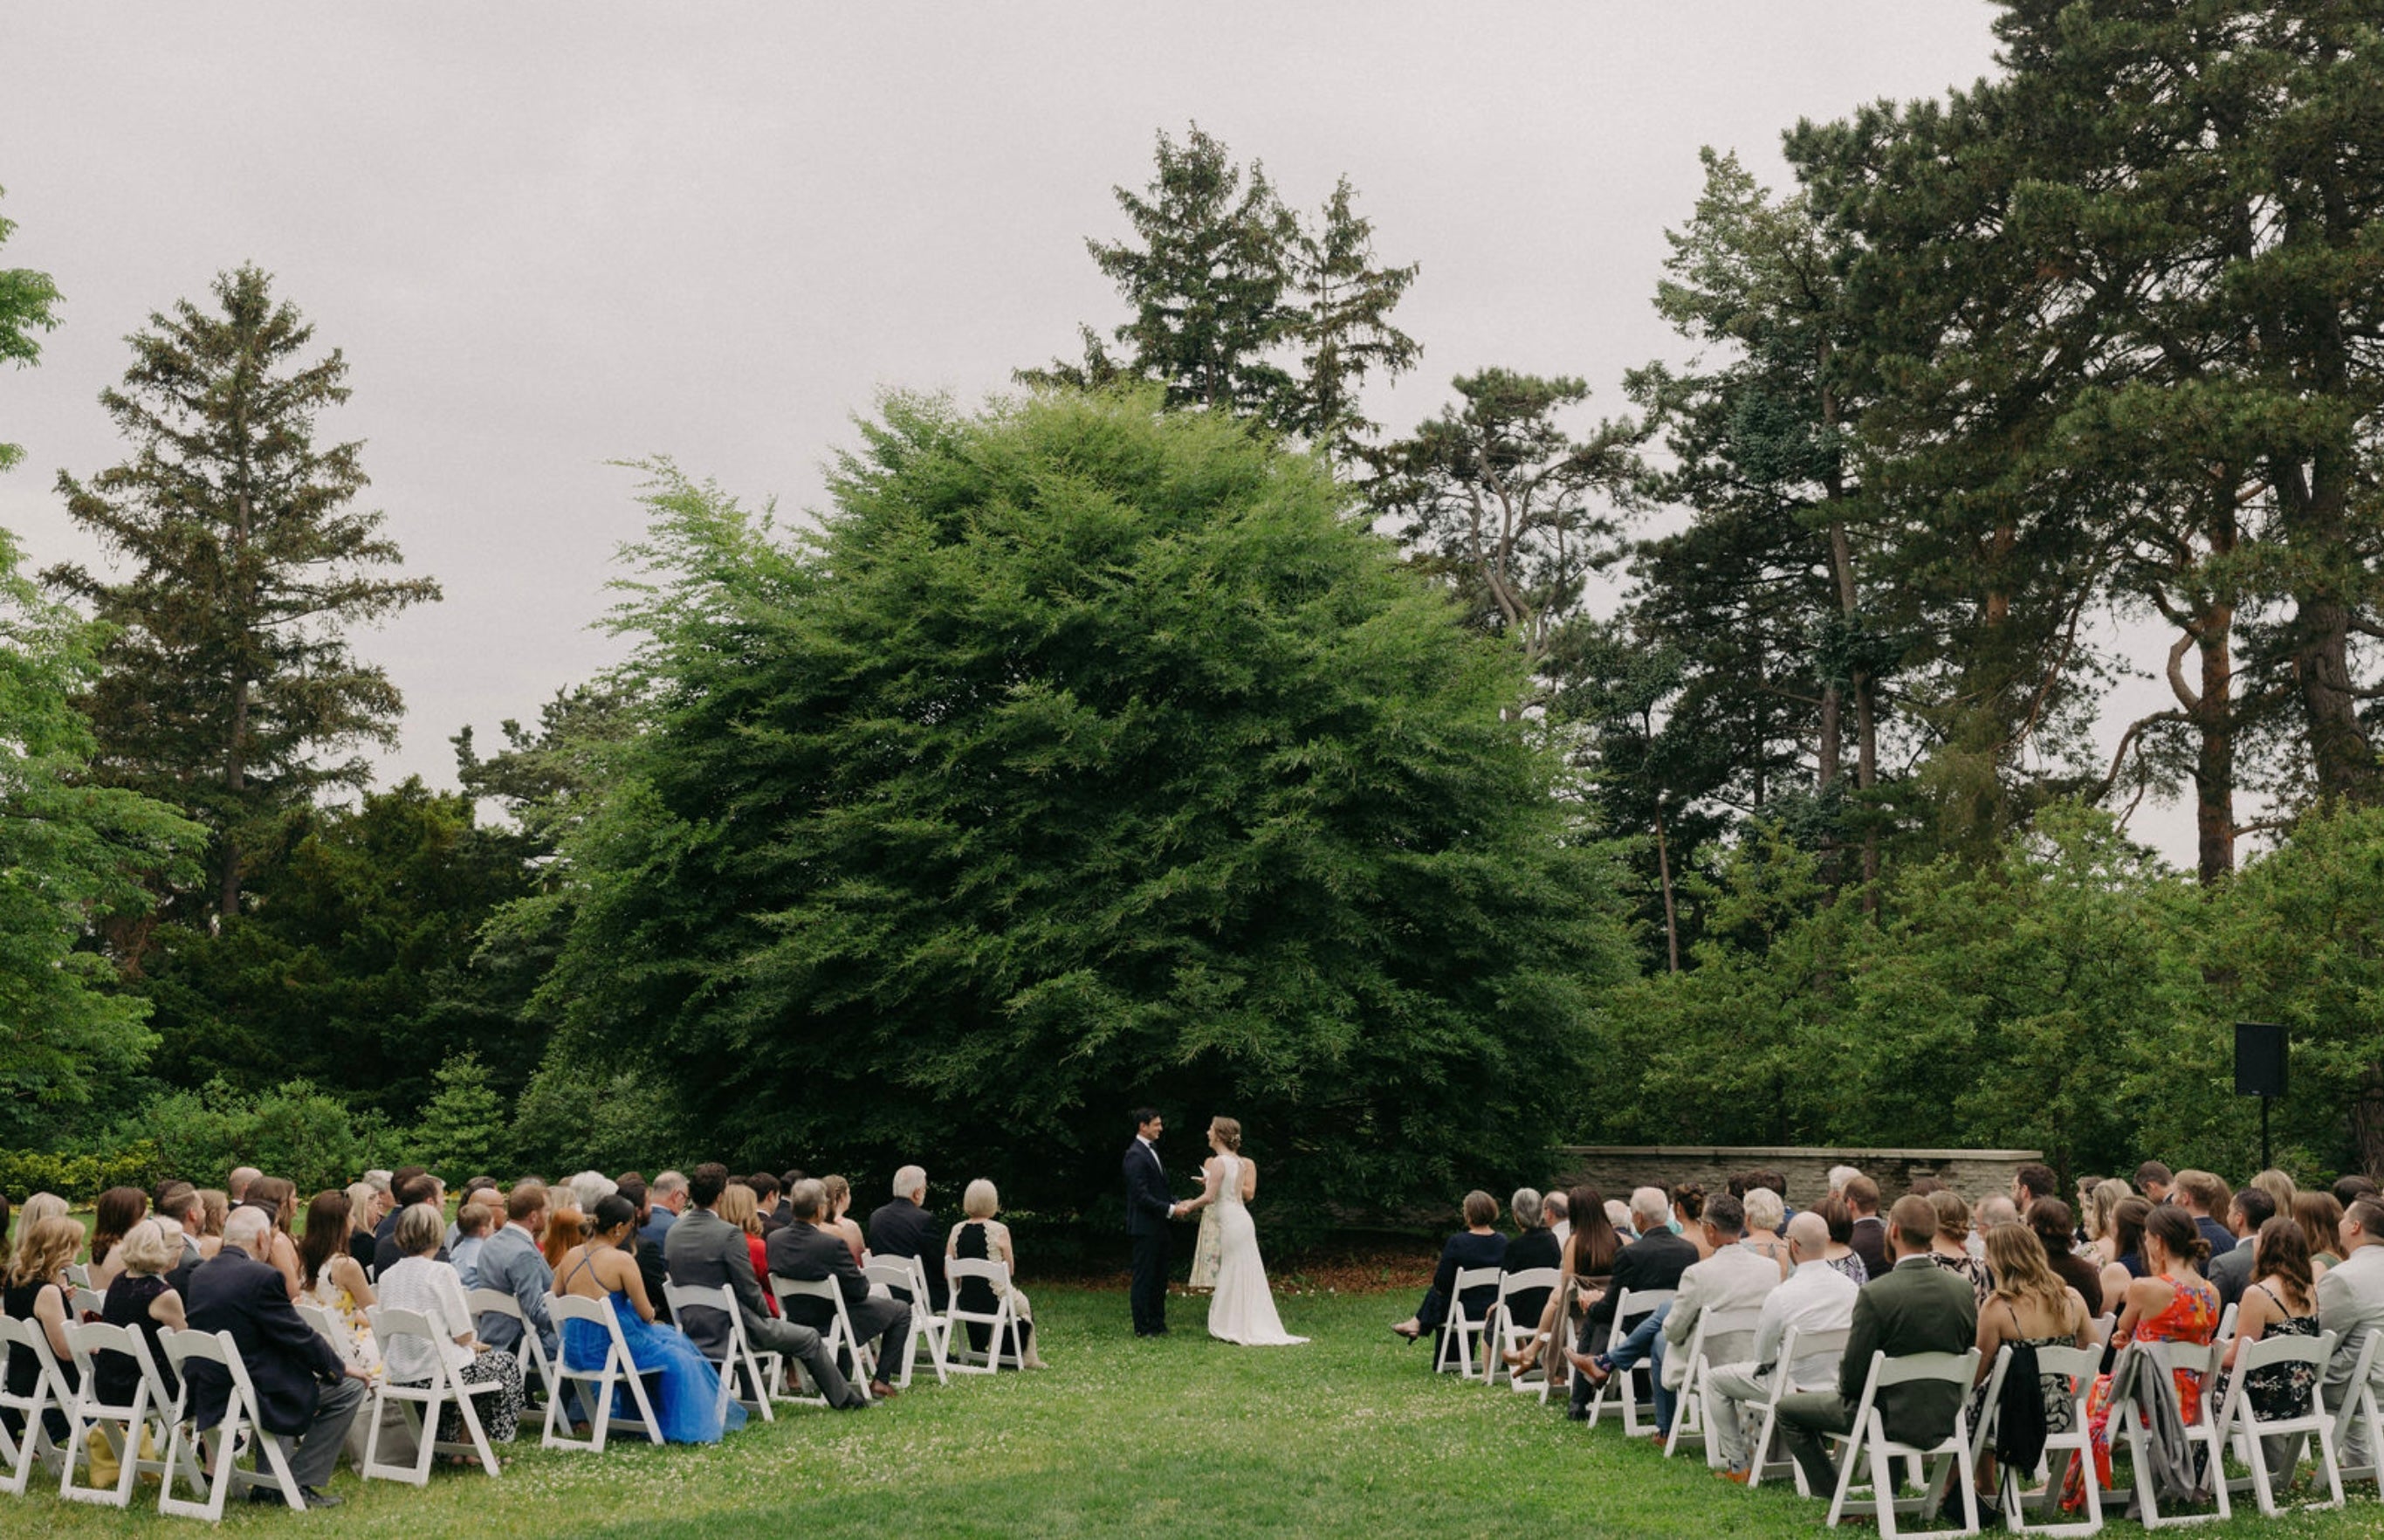 Couple at outdoor wedding ceremony